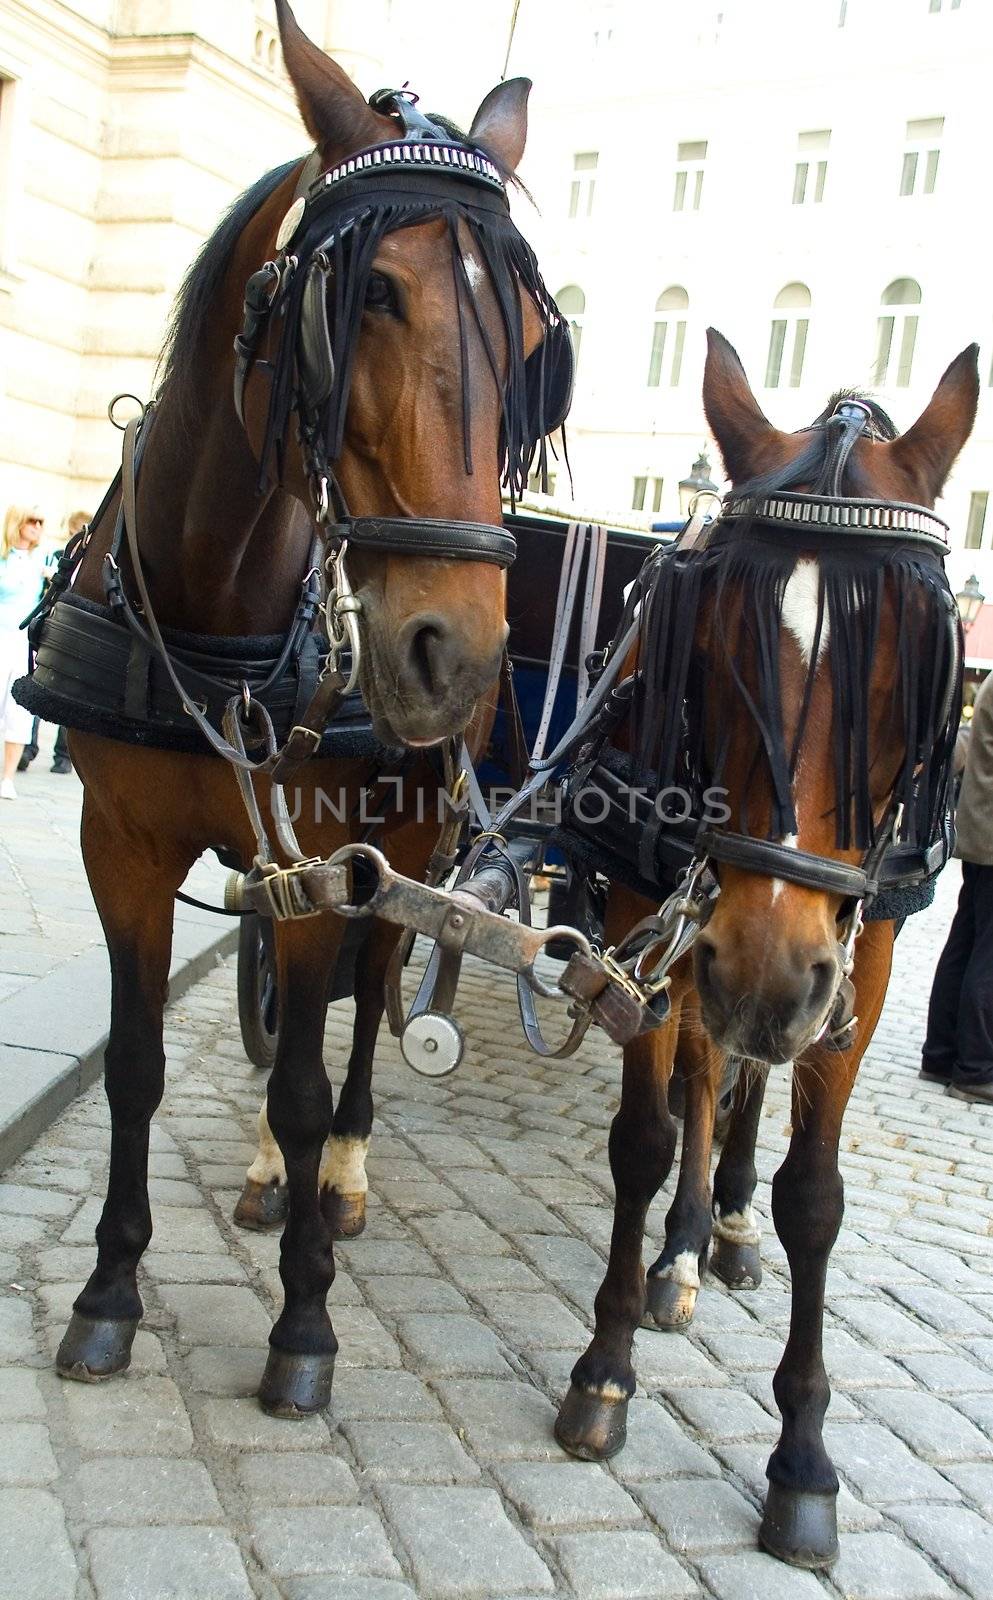 The horses harnessed in a vehicle for walks on a city